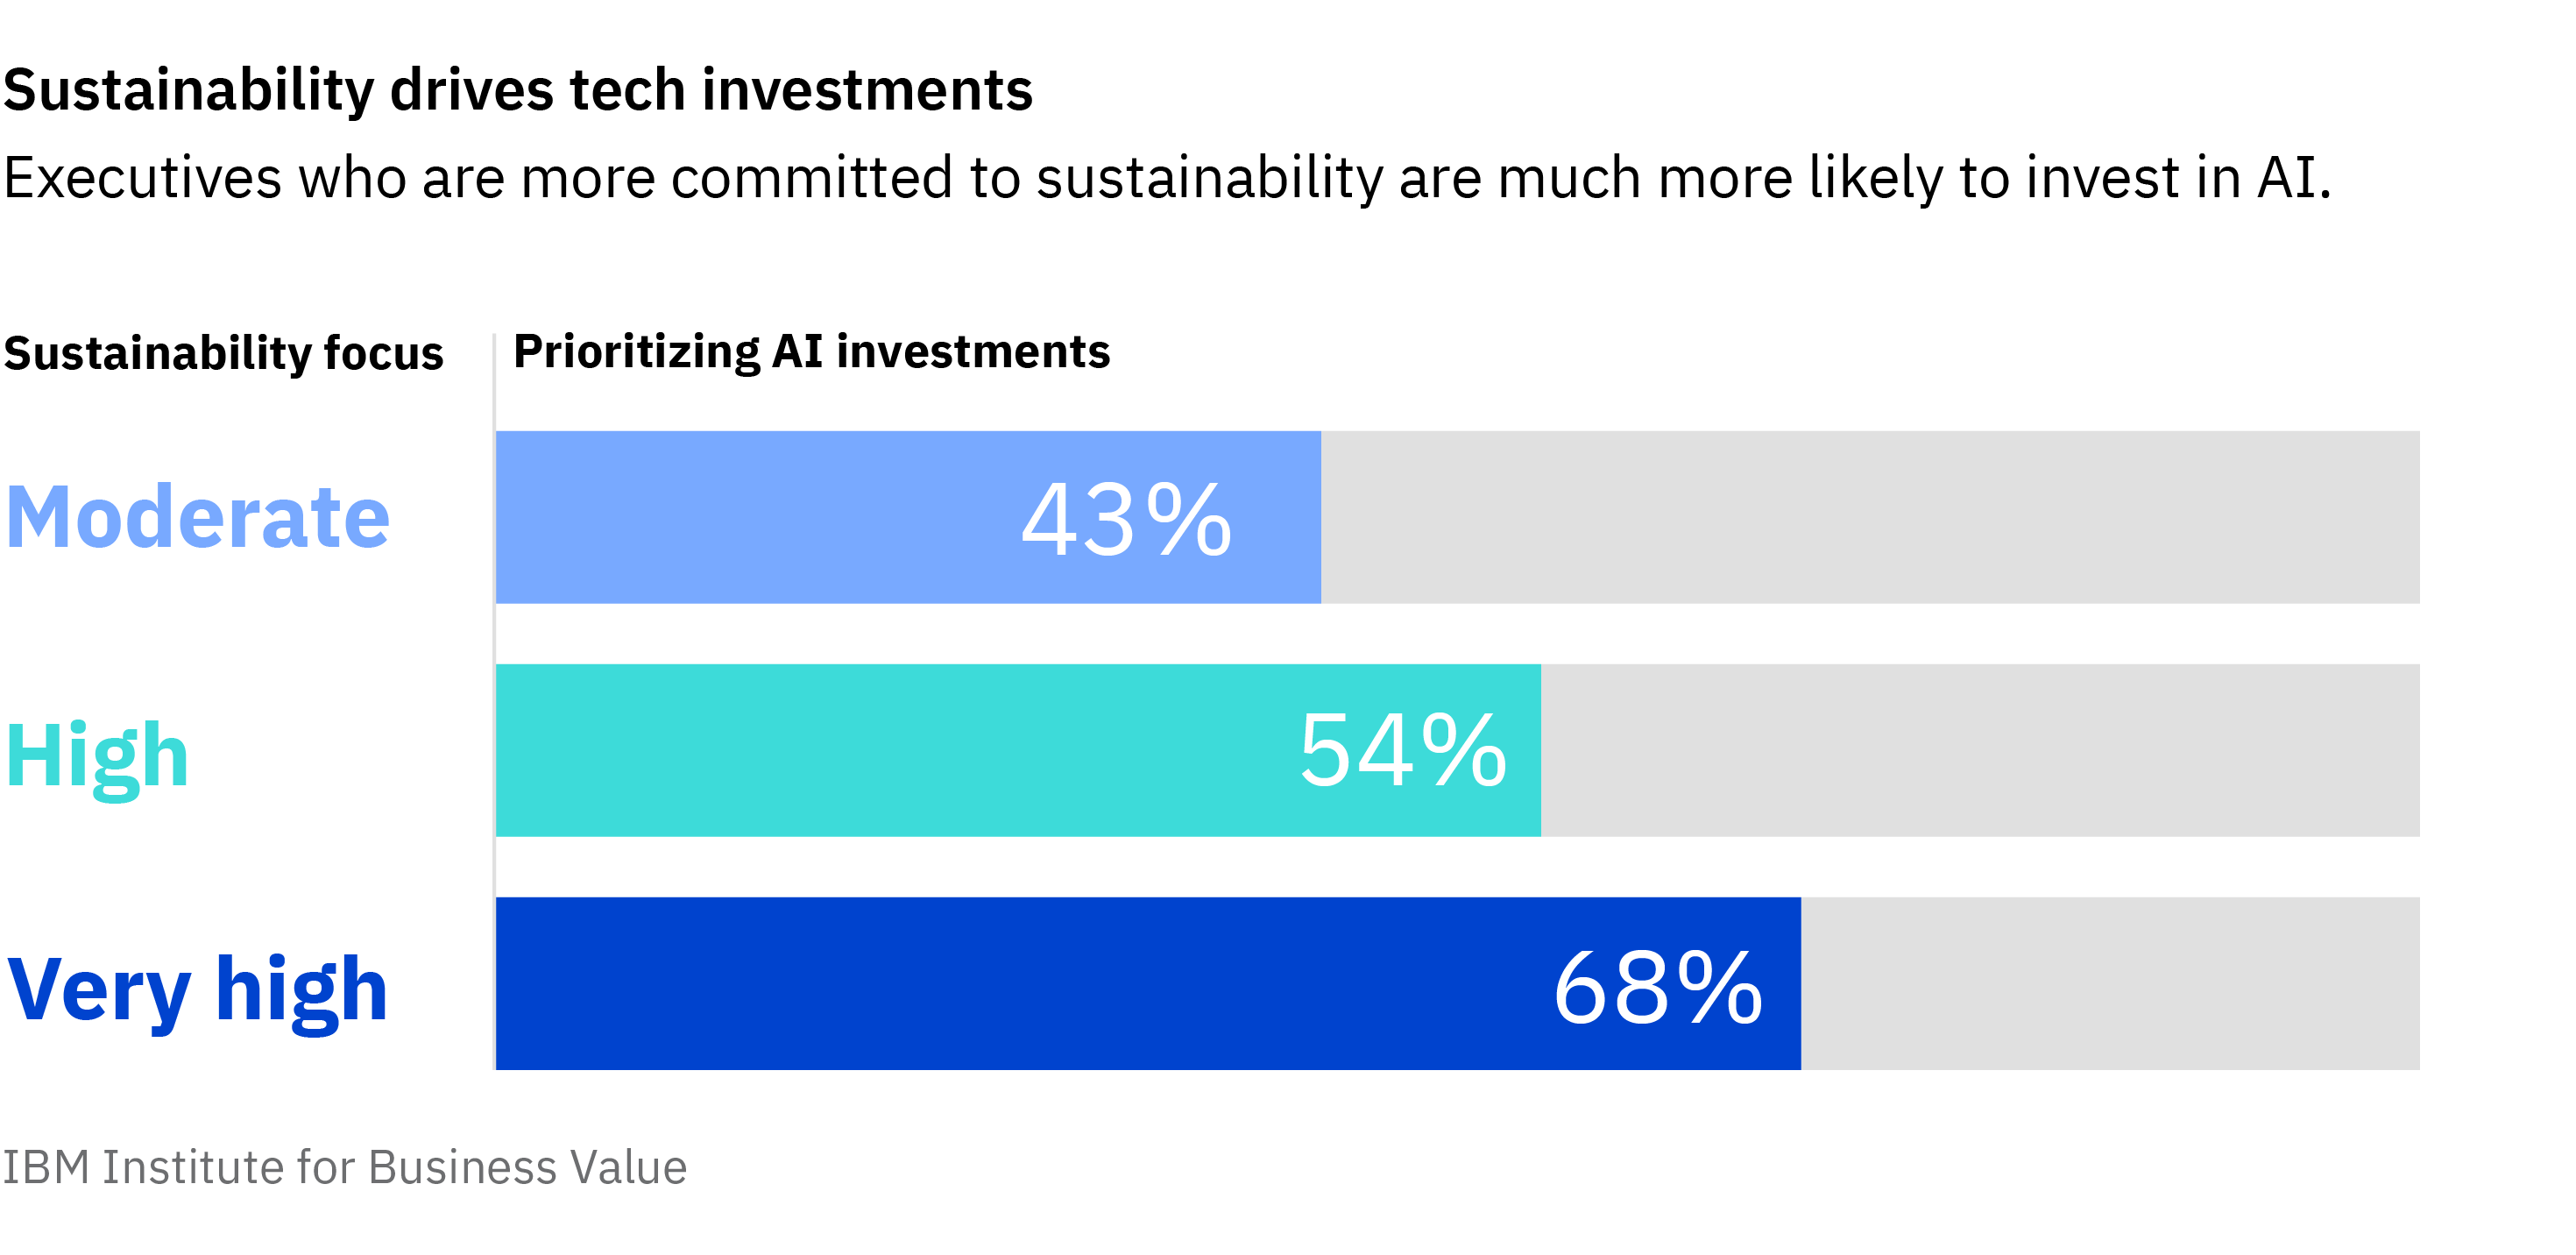 Sustainability drives tech investments. Executives who are more committed to sustainability are much more likely to invest in AI.